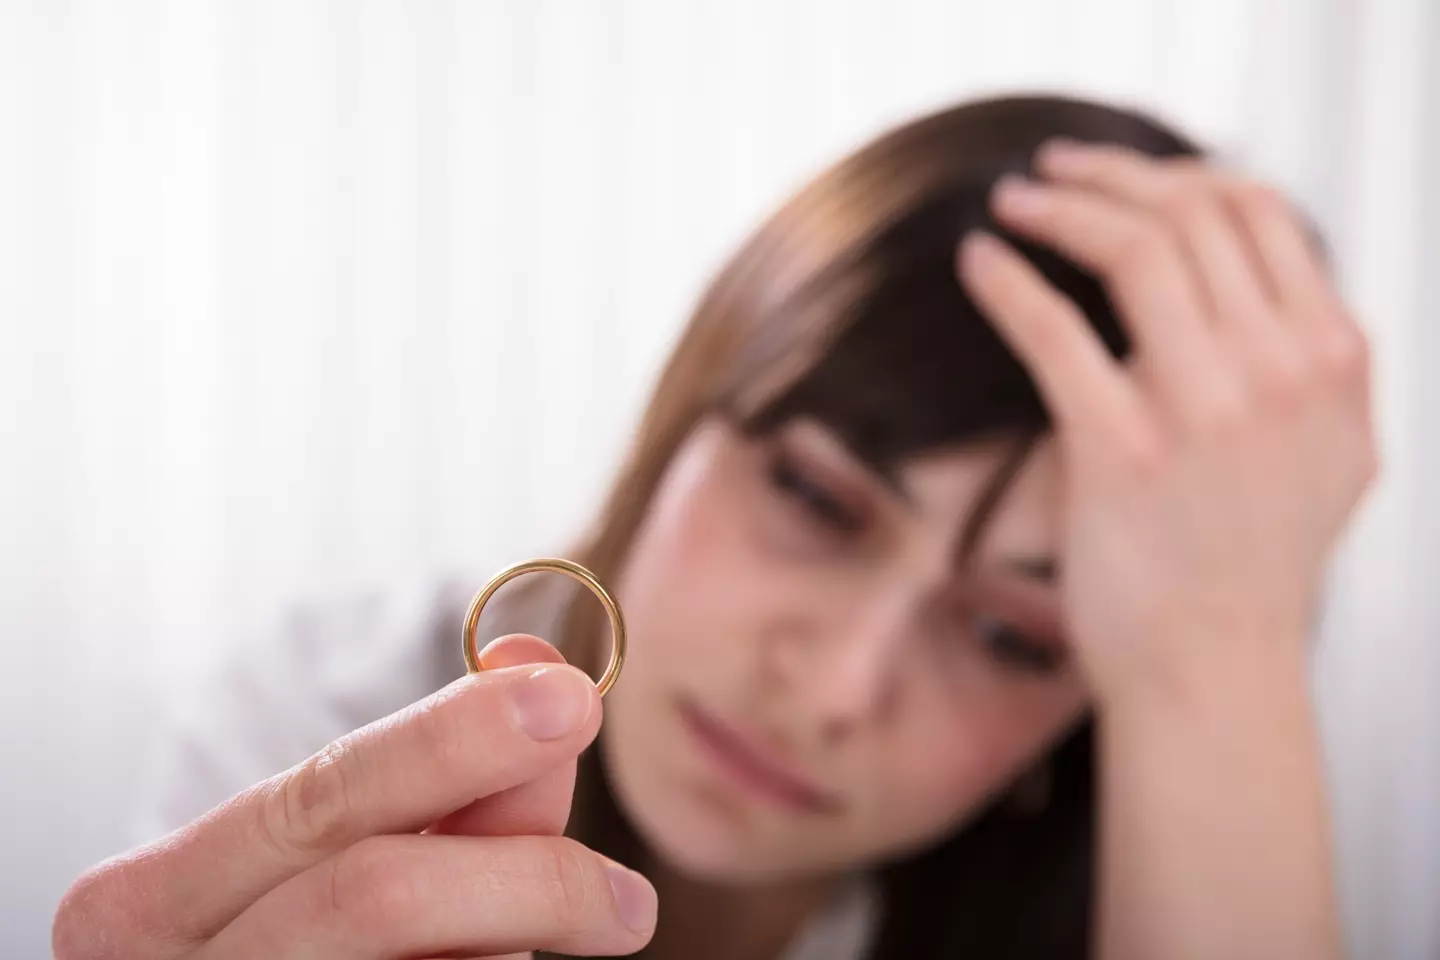 Some women are sharing why they're happy not being married.